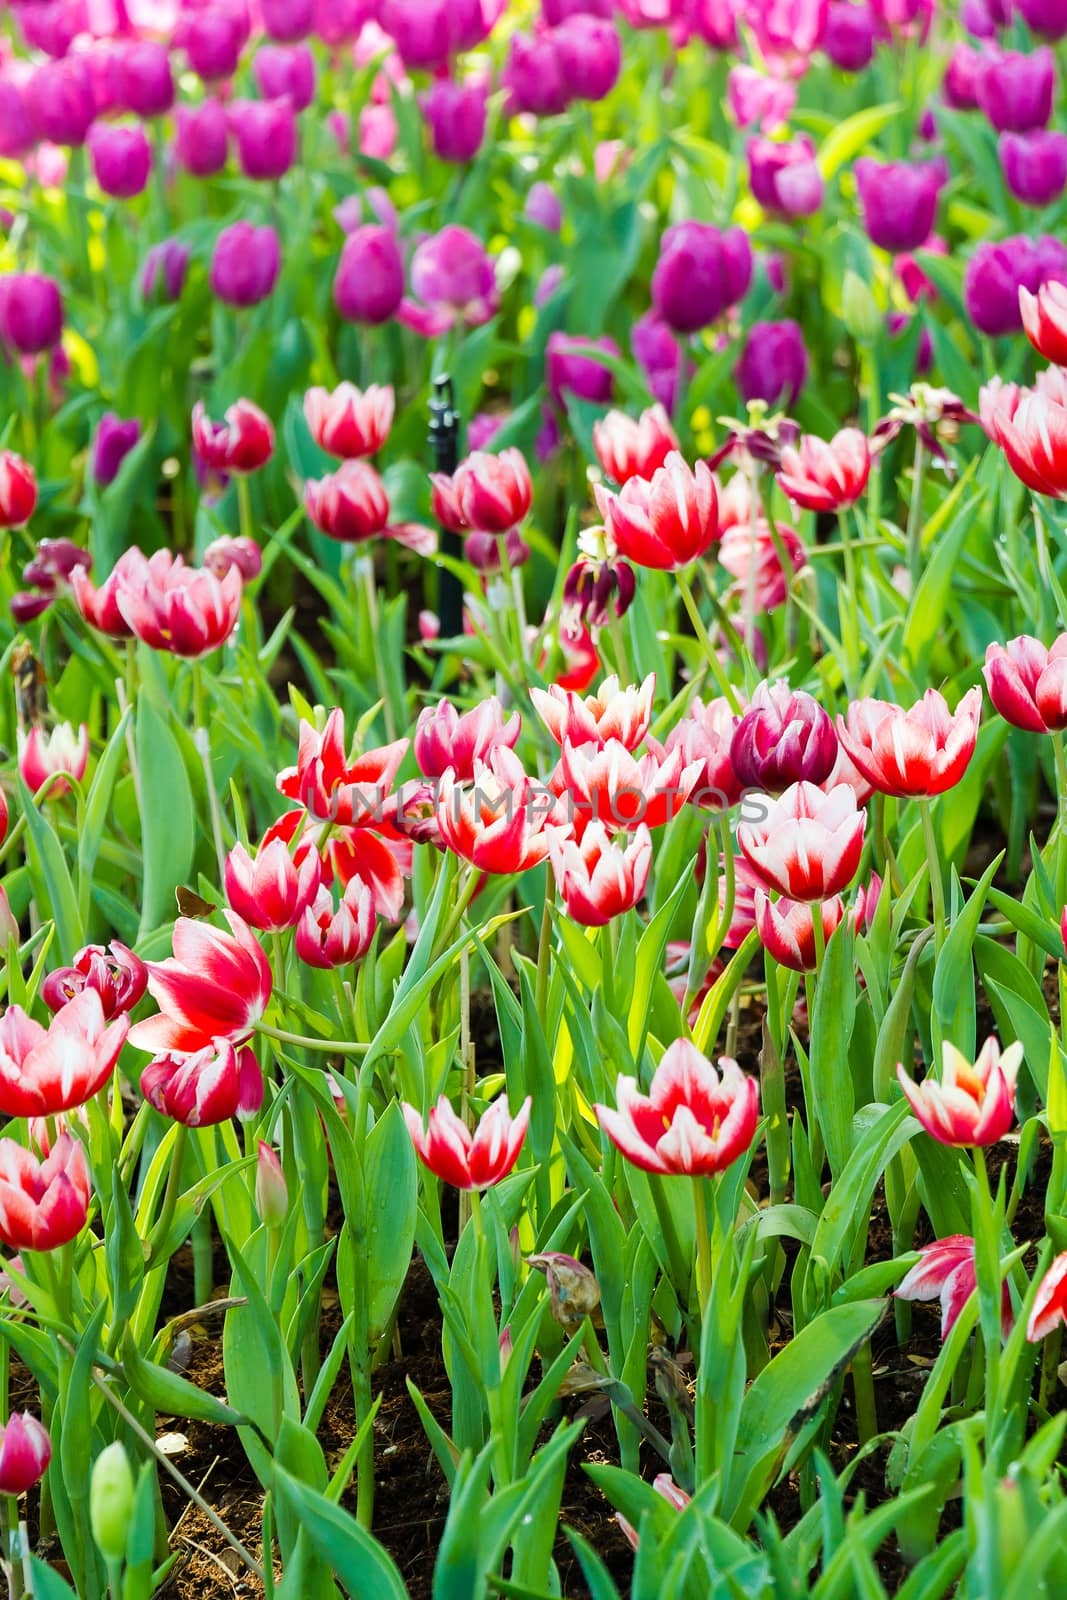 Field of Tulips in various colors by chingraph